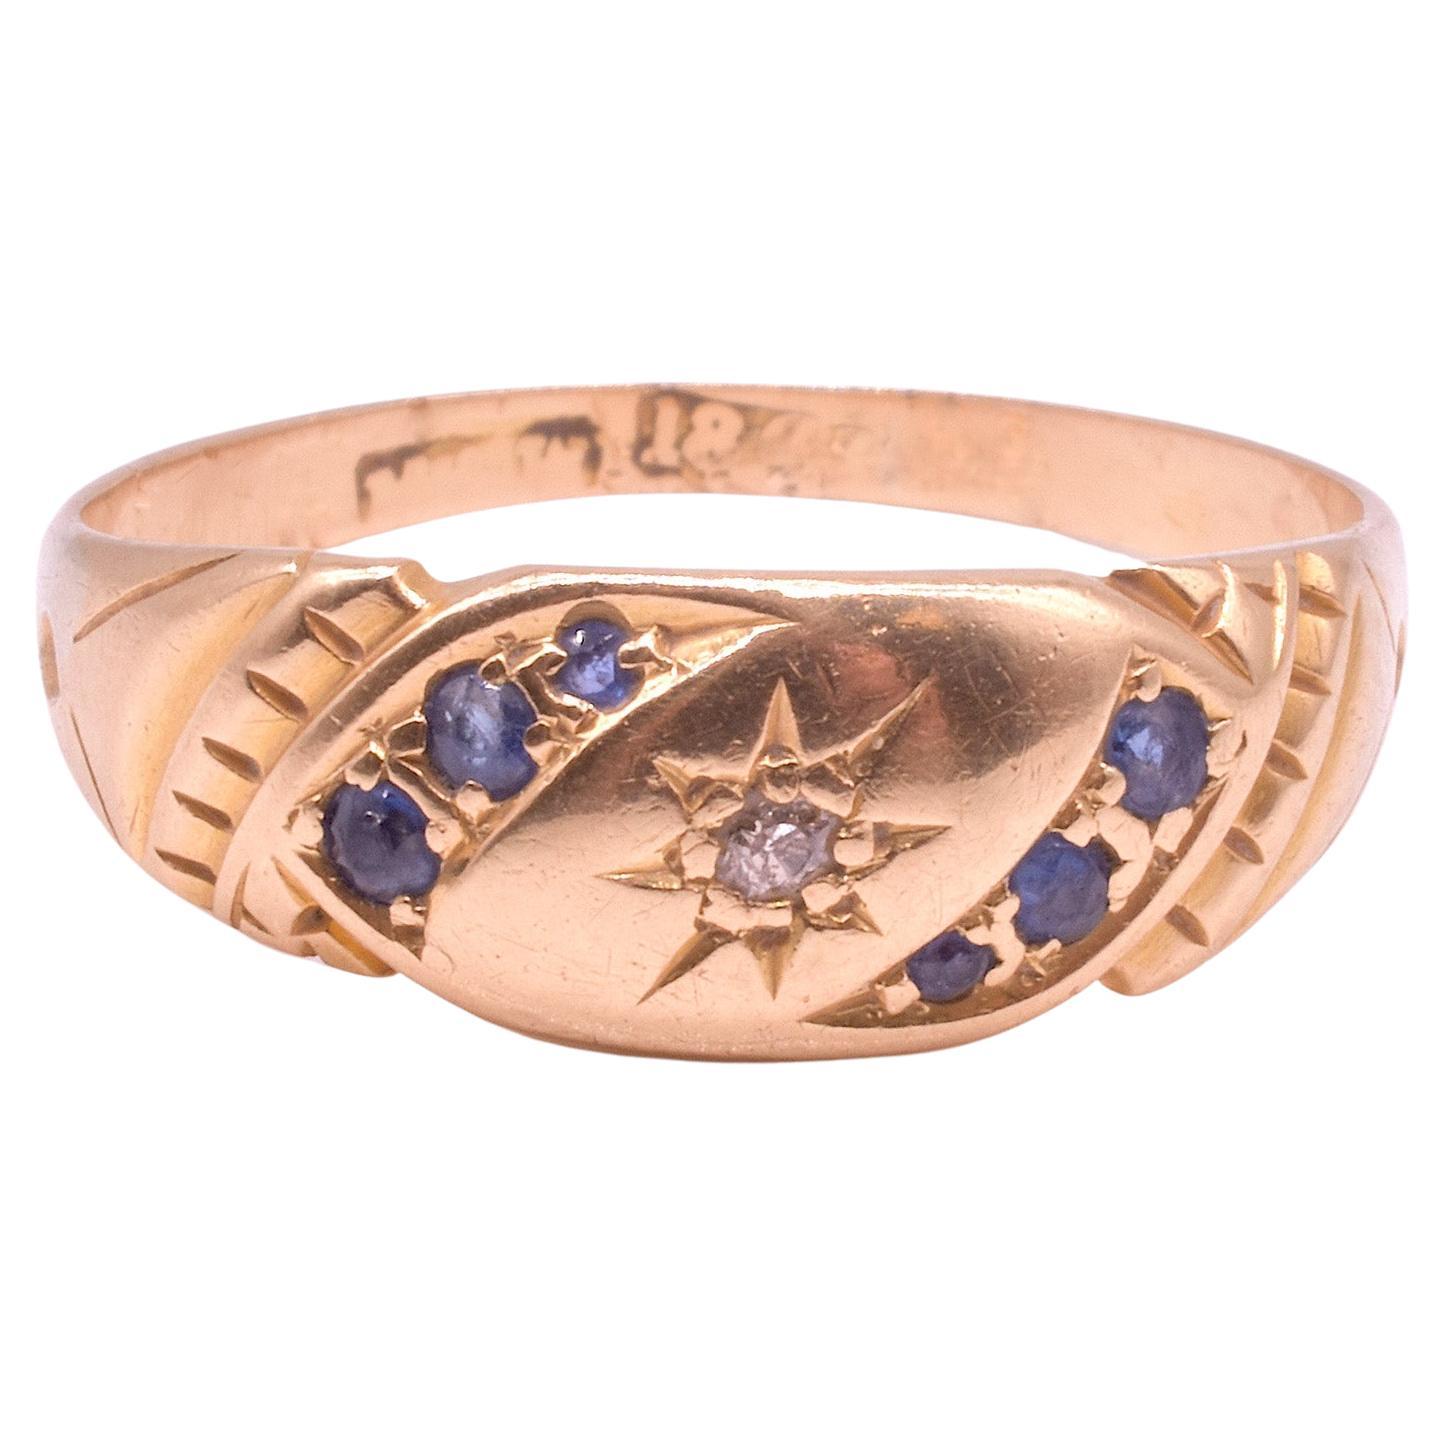 This charming old European cut diamond and sapphire gypsy set ring from around the turn of the century is an unusual combination of 3 sapphire stones set in a banner flanking a central star set diamond. The buttery yellow gold sets off the colors of